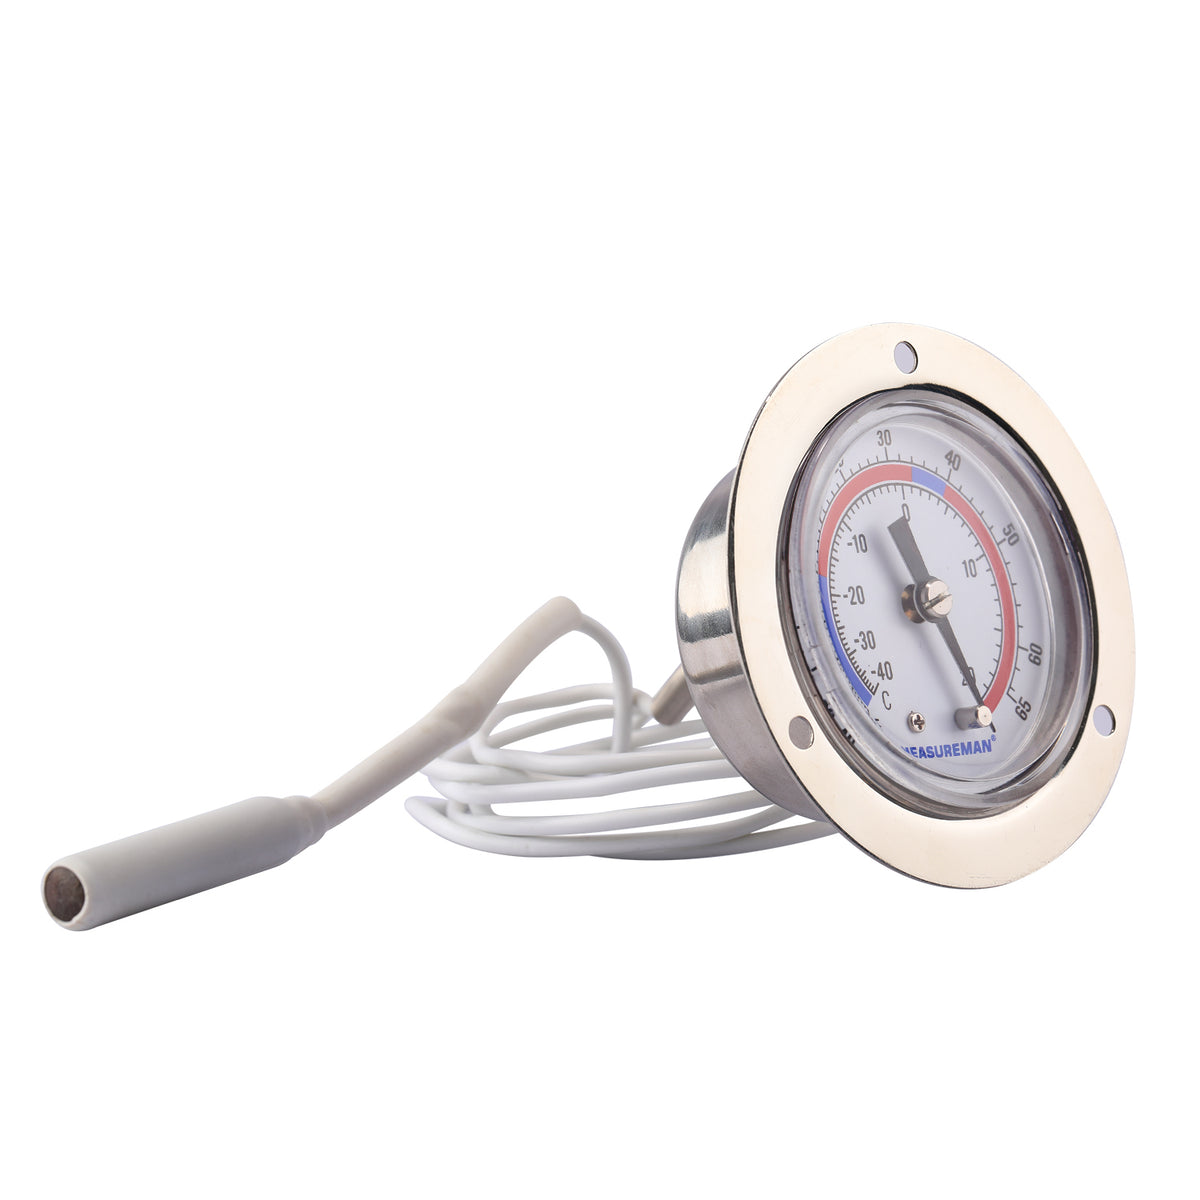 FMP 138-1074 Dishwasher Thermometer, 2 dial, 3 flange